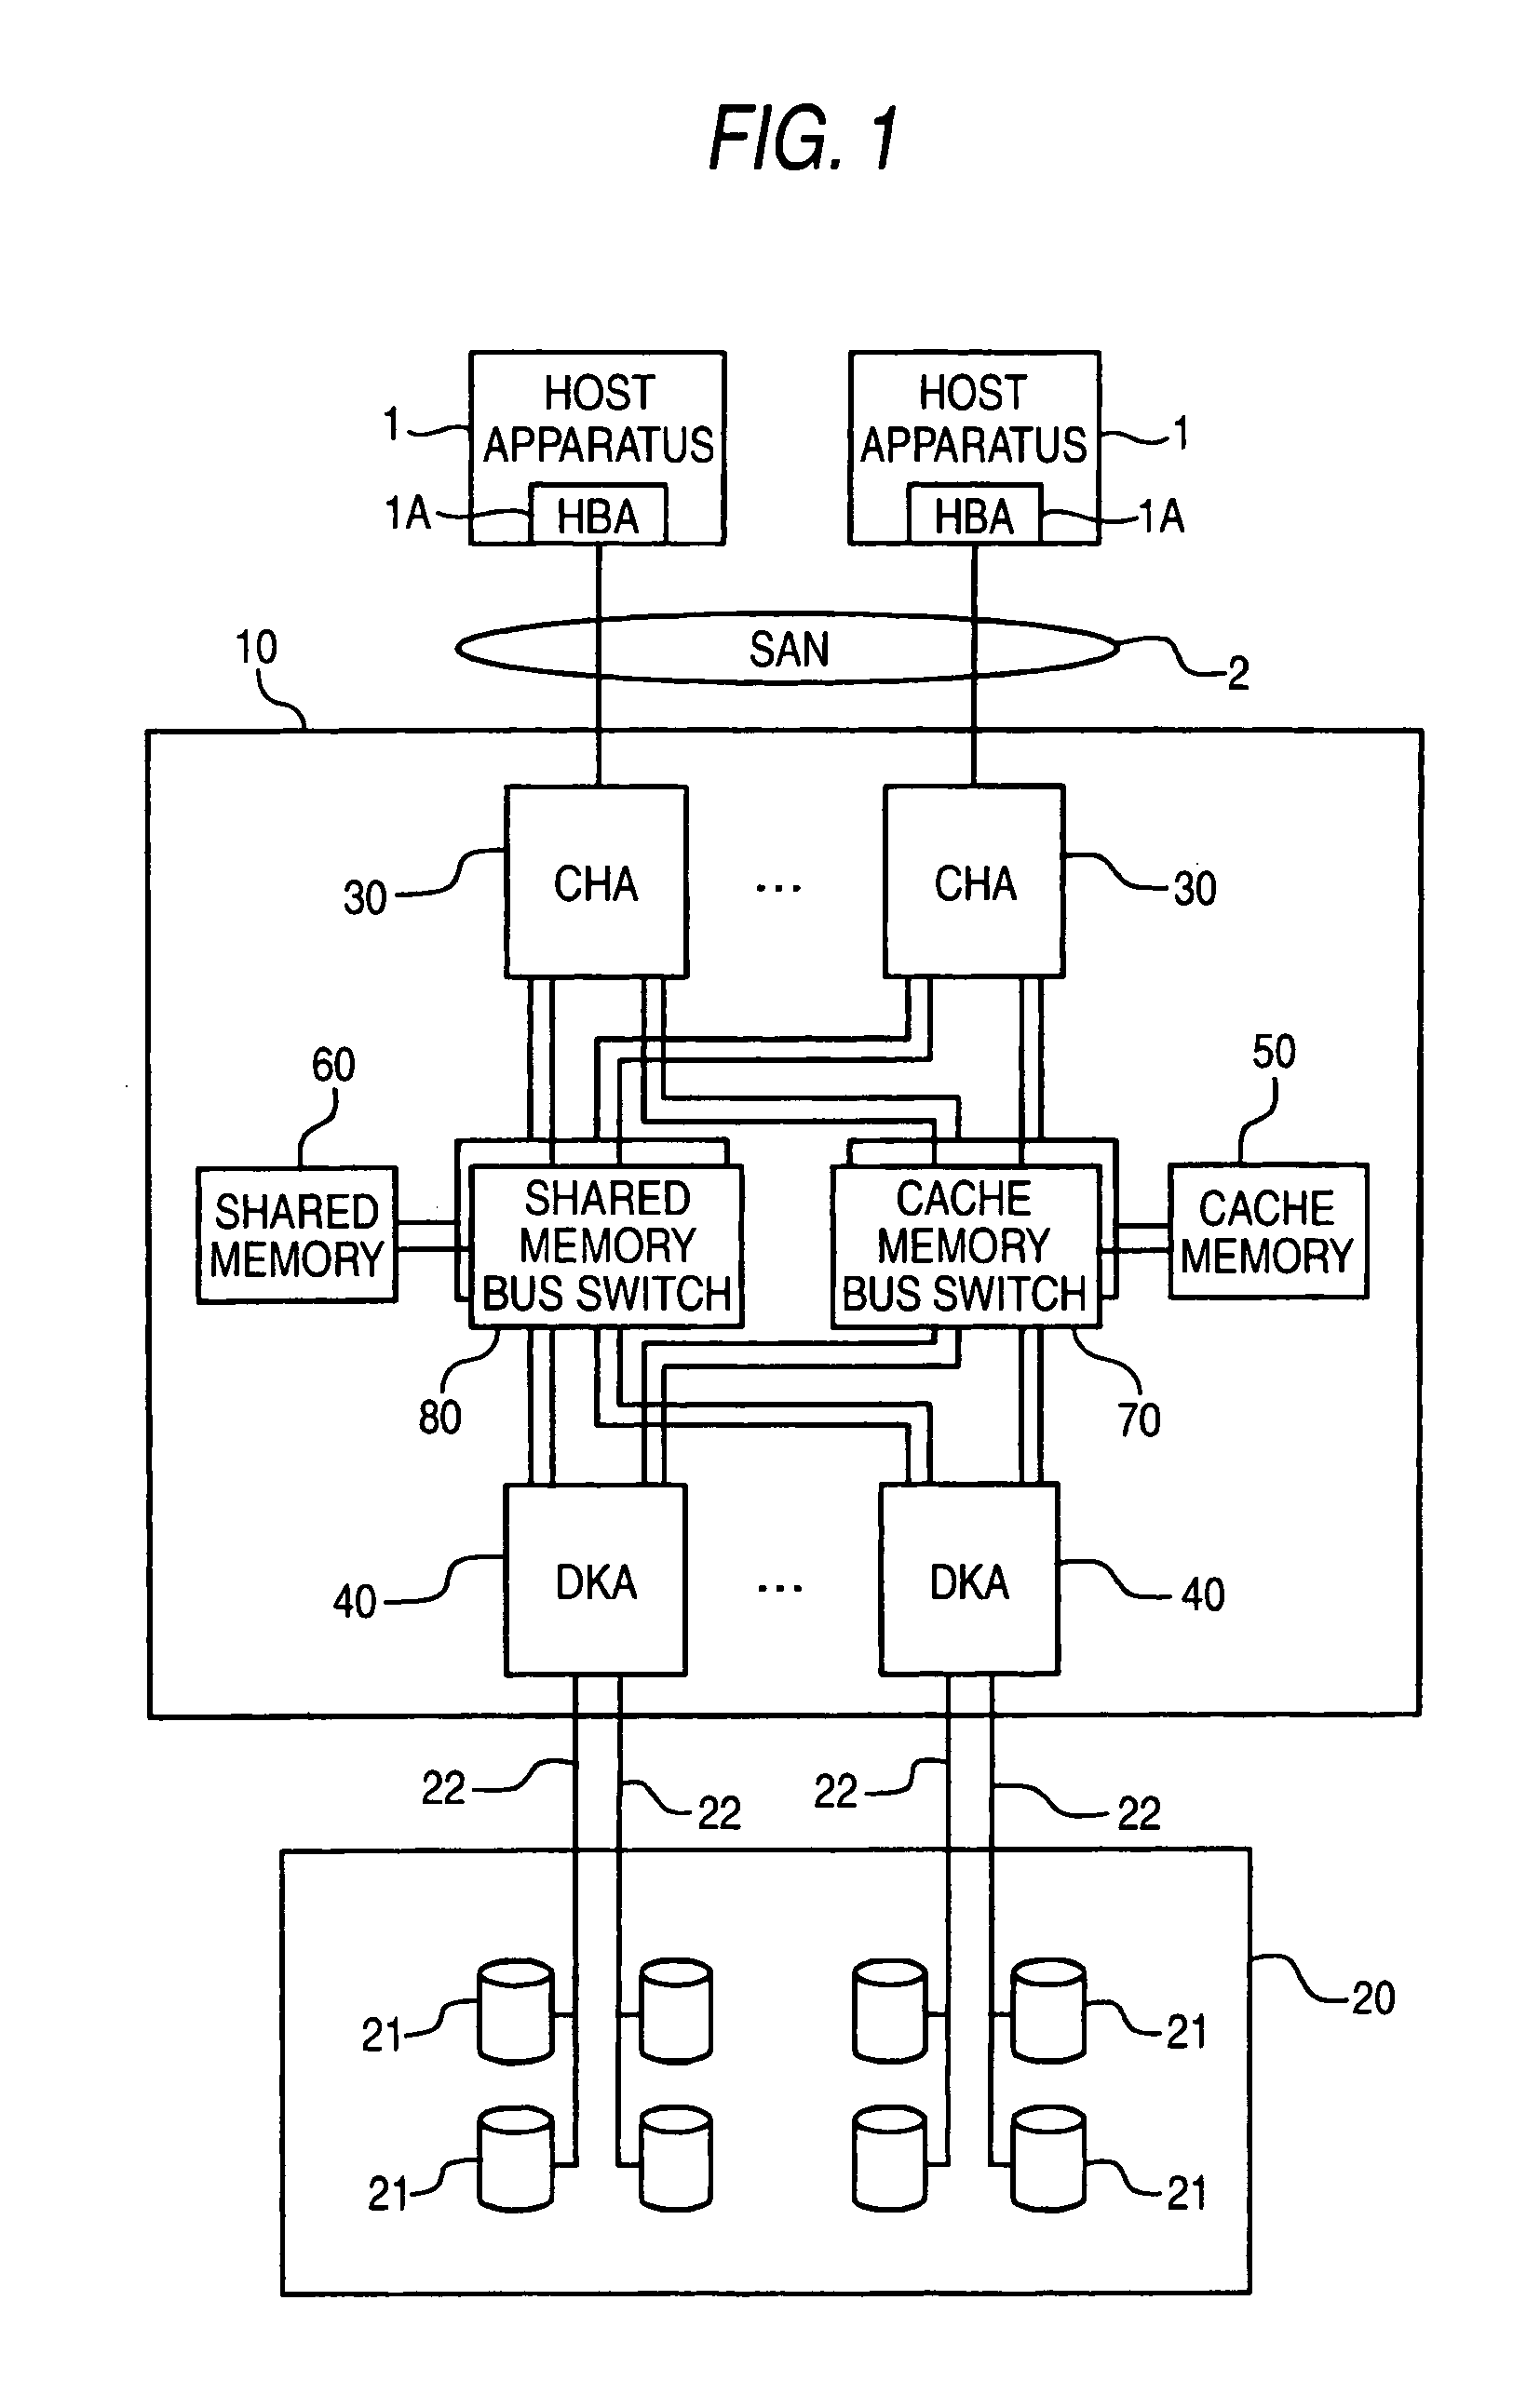 Fitting substrate for connection and fitting substrate for connection for use in disk array control apparatus